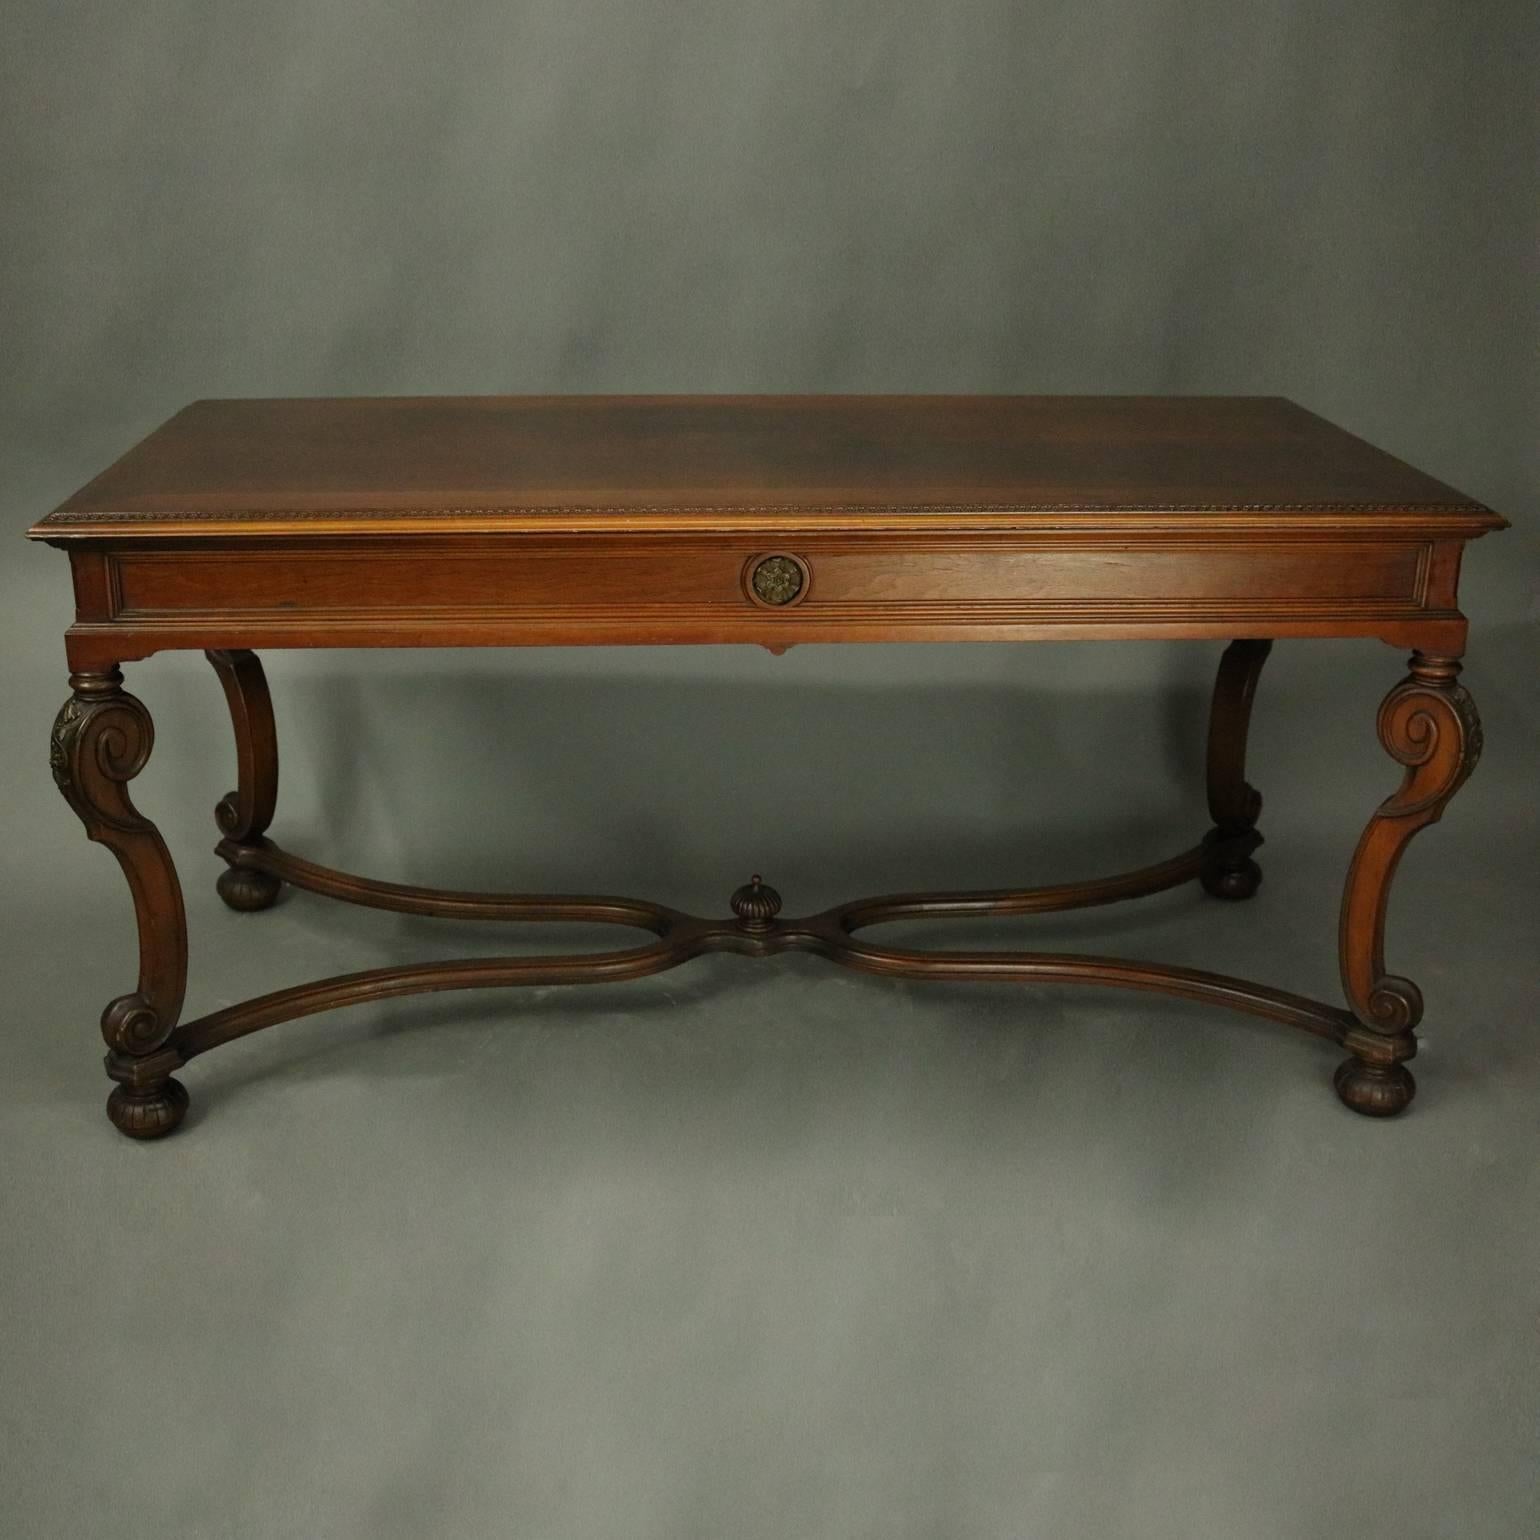 Antique French Louis XIV style sofa table features top with carved foliate border surround of bookmatched quarters and burl inset, reeded apron with central caved rosettes, supporting scrolled volute legs with carved acanthus knees, connecting